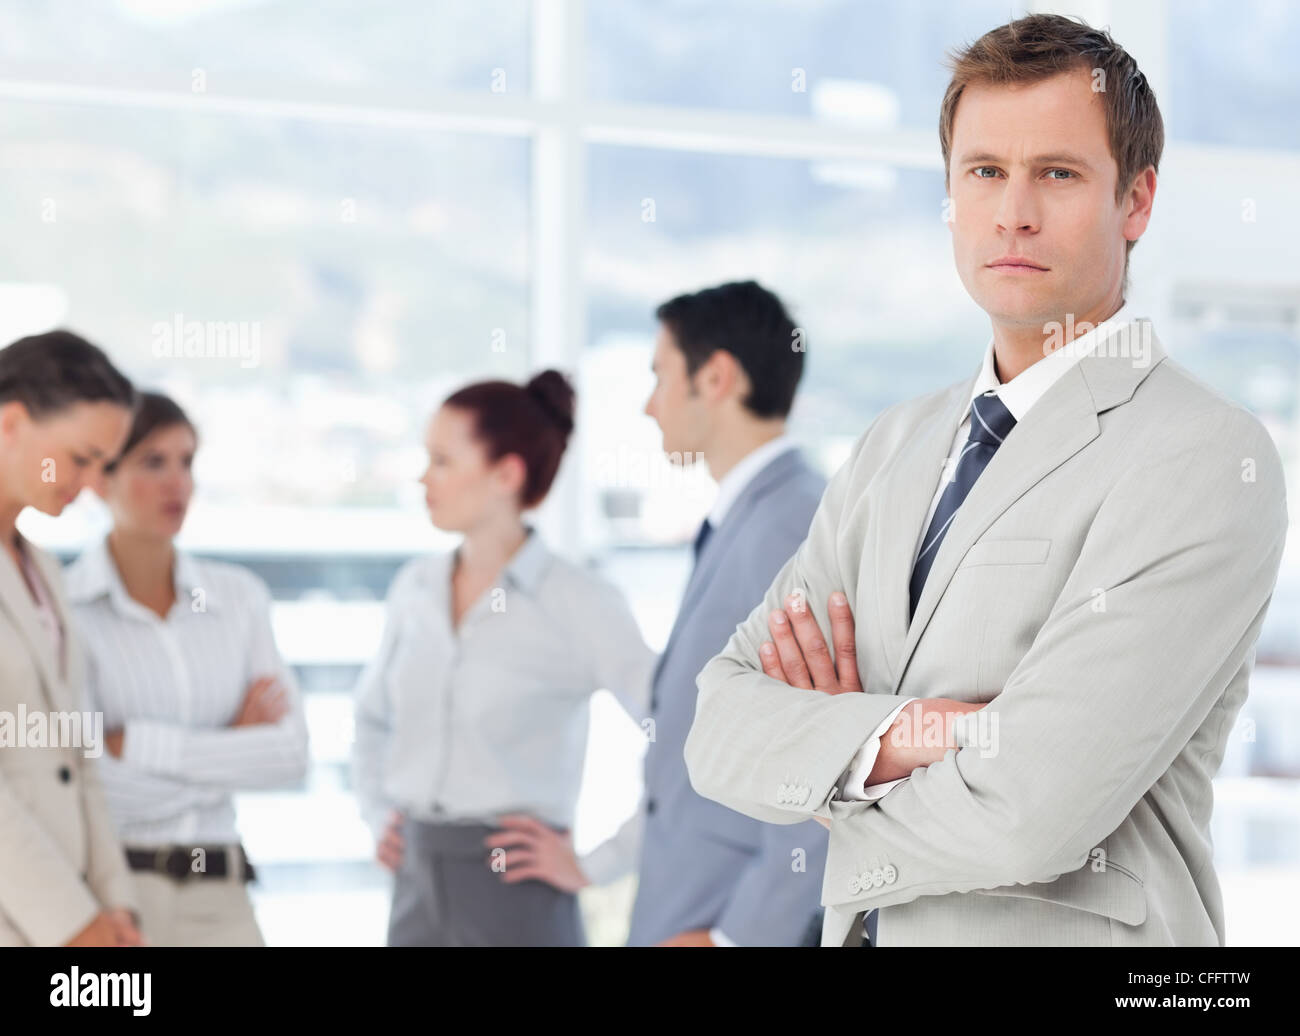 Salesman with arms crossed and colleagues behind him Stock Photo